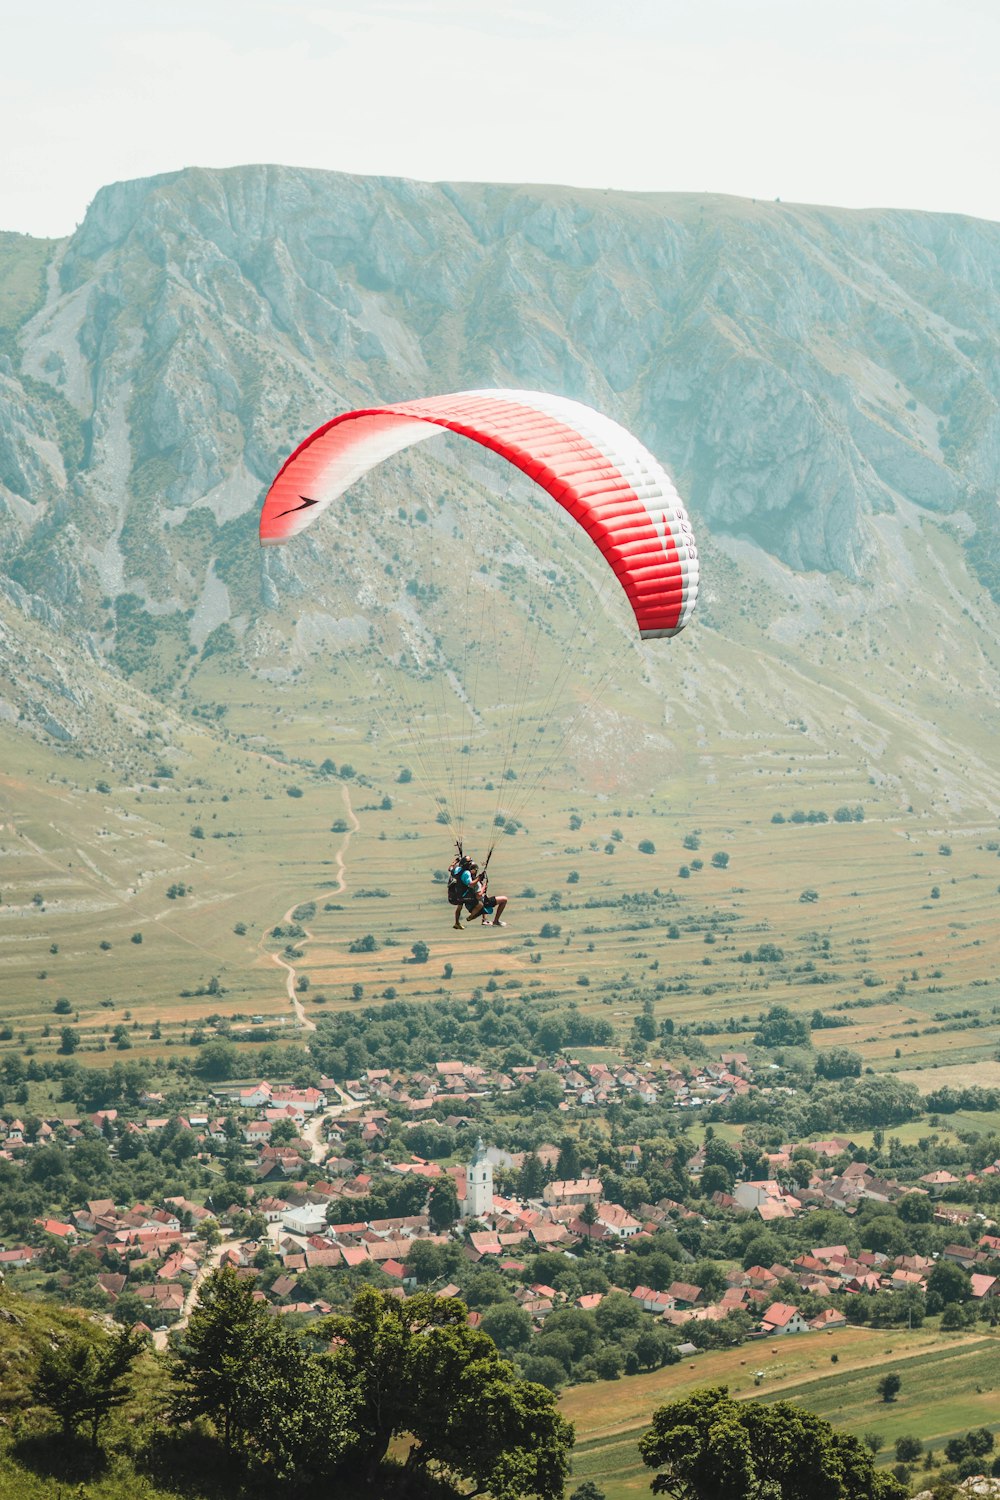 person riding on red and white parachute over green mountains during daytime